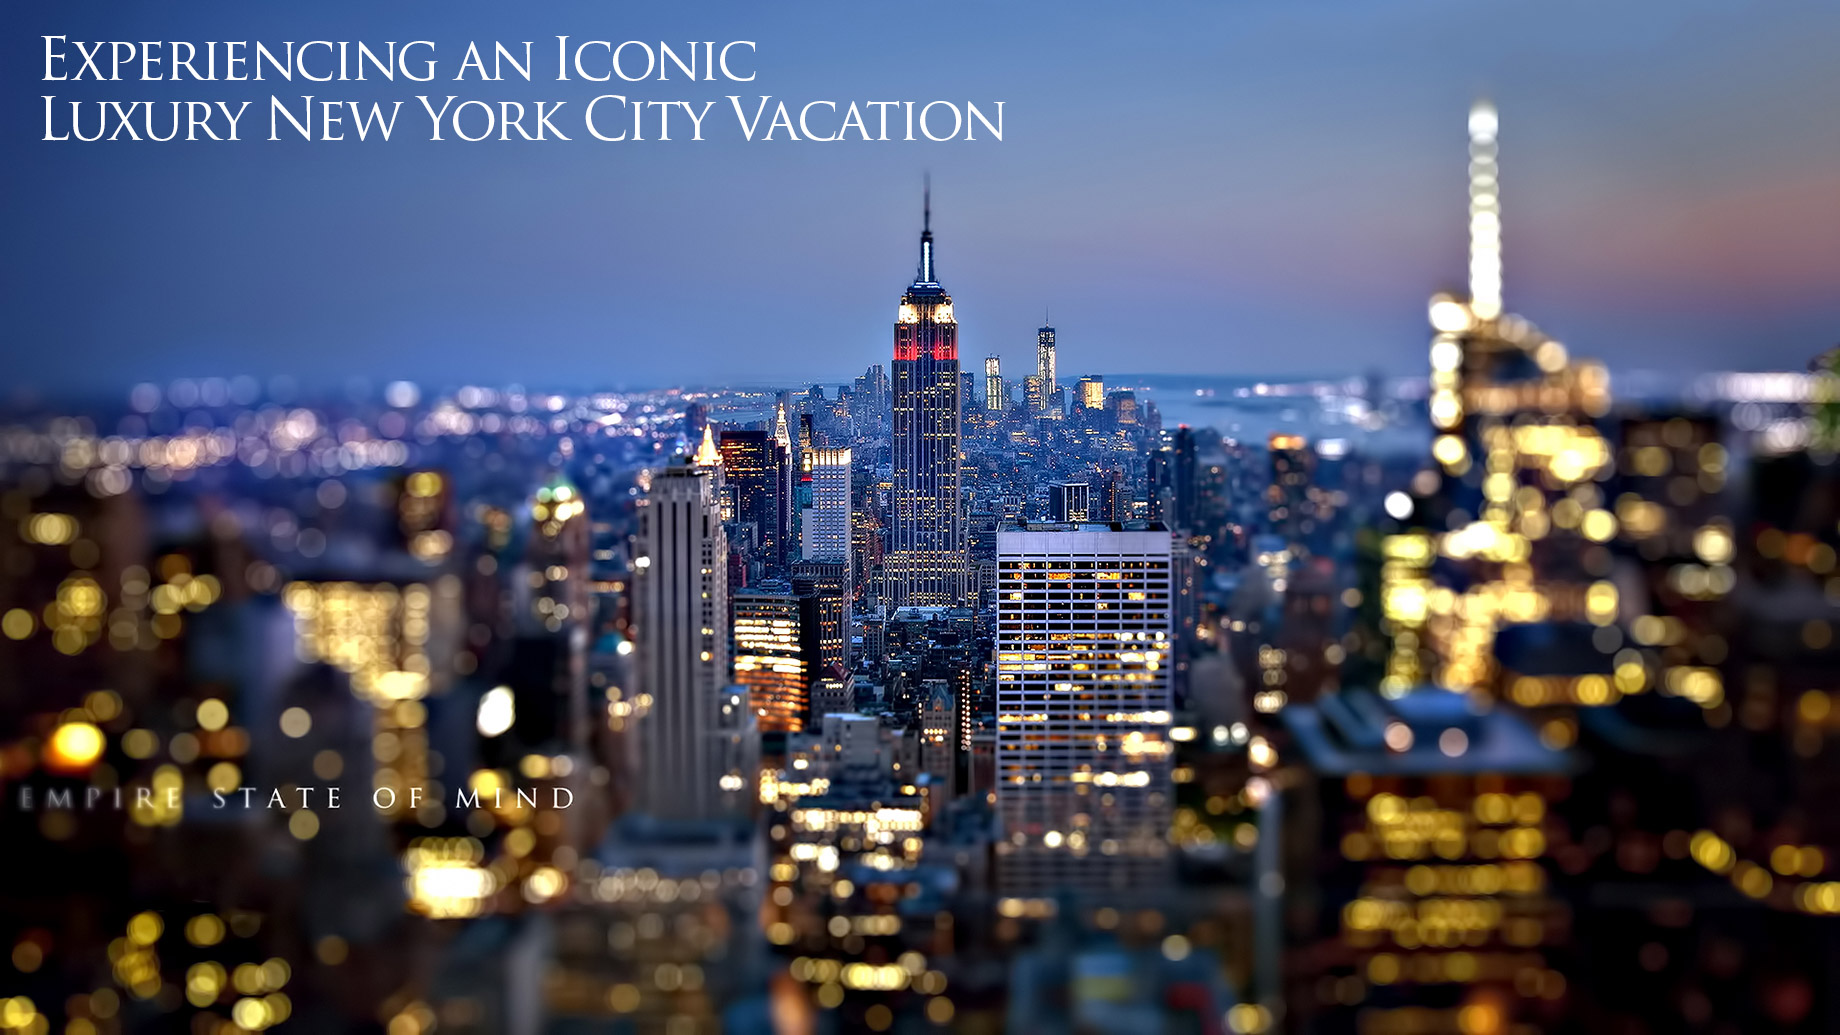 Empire State of Mind – Experiencing an Iconic Luxury New York City Vacation